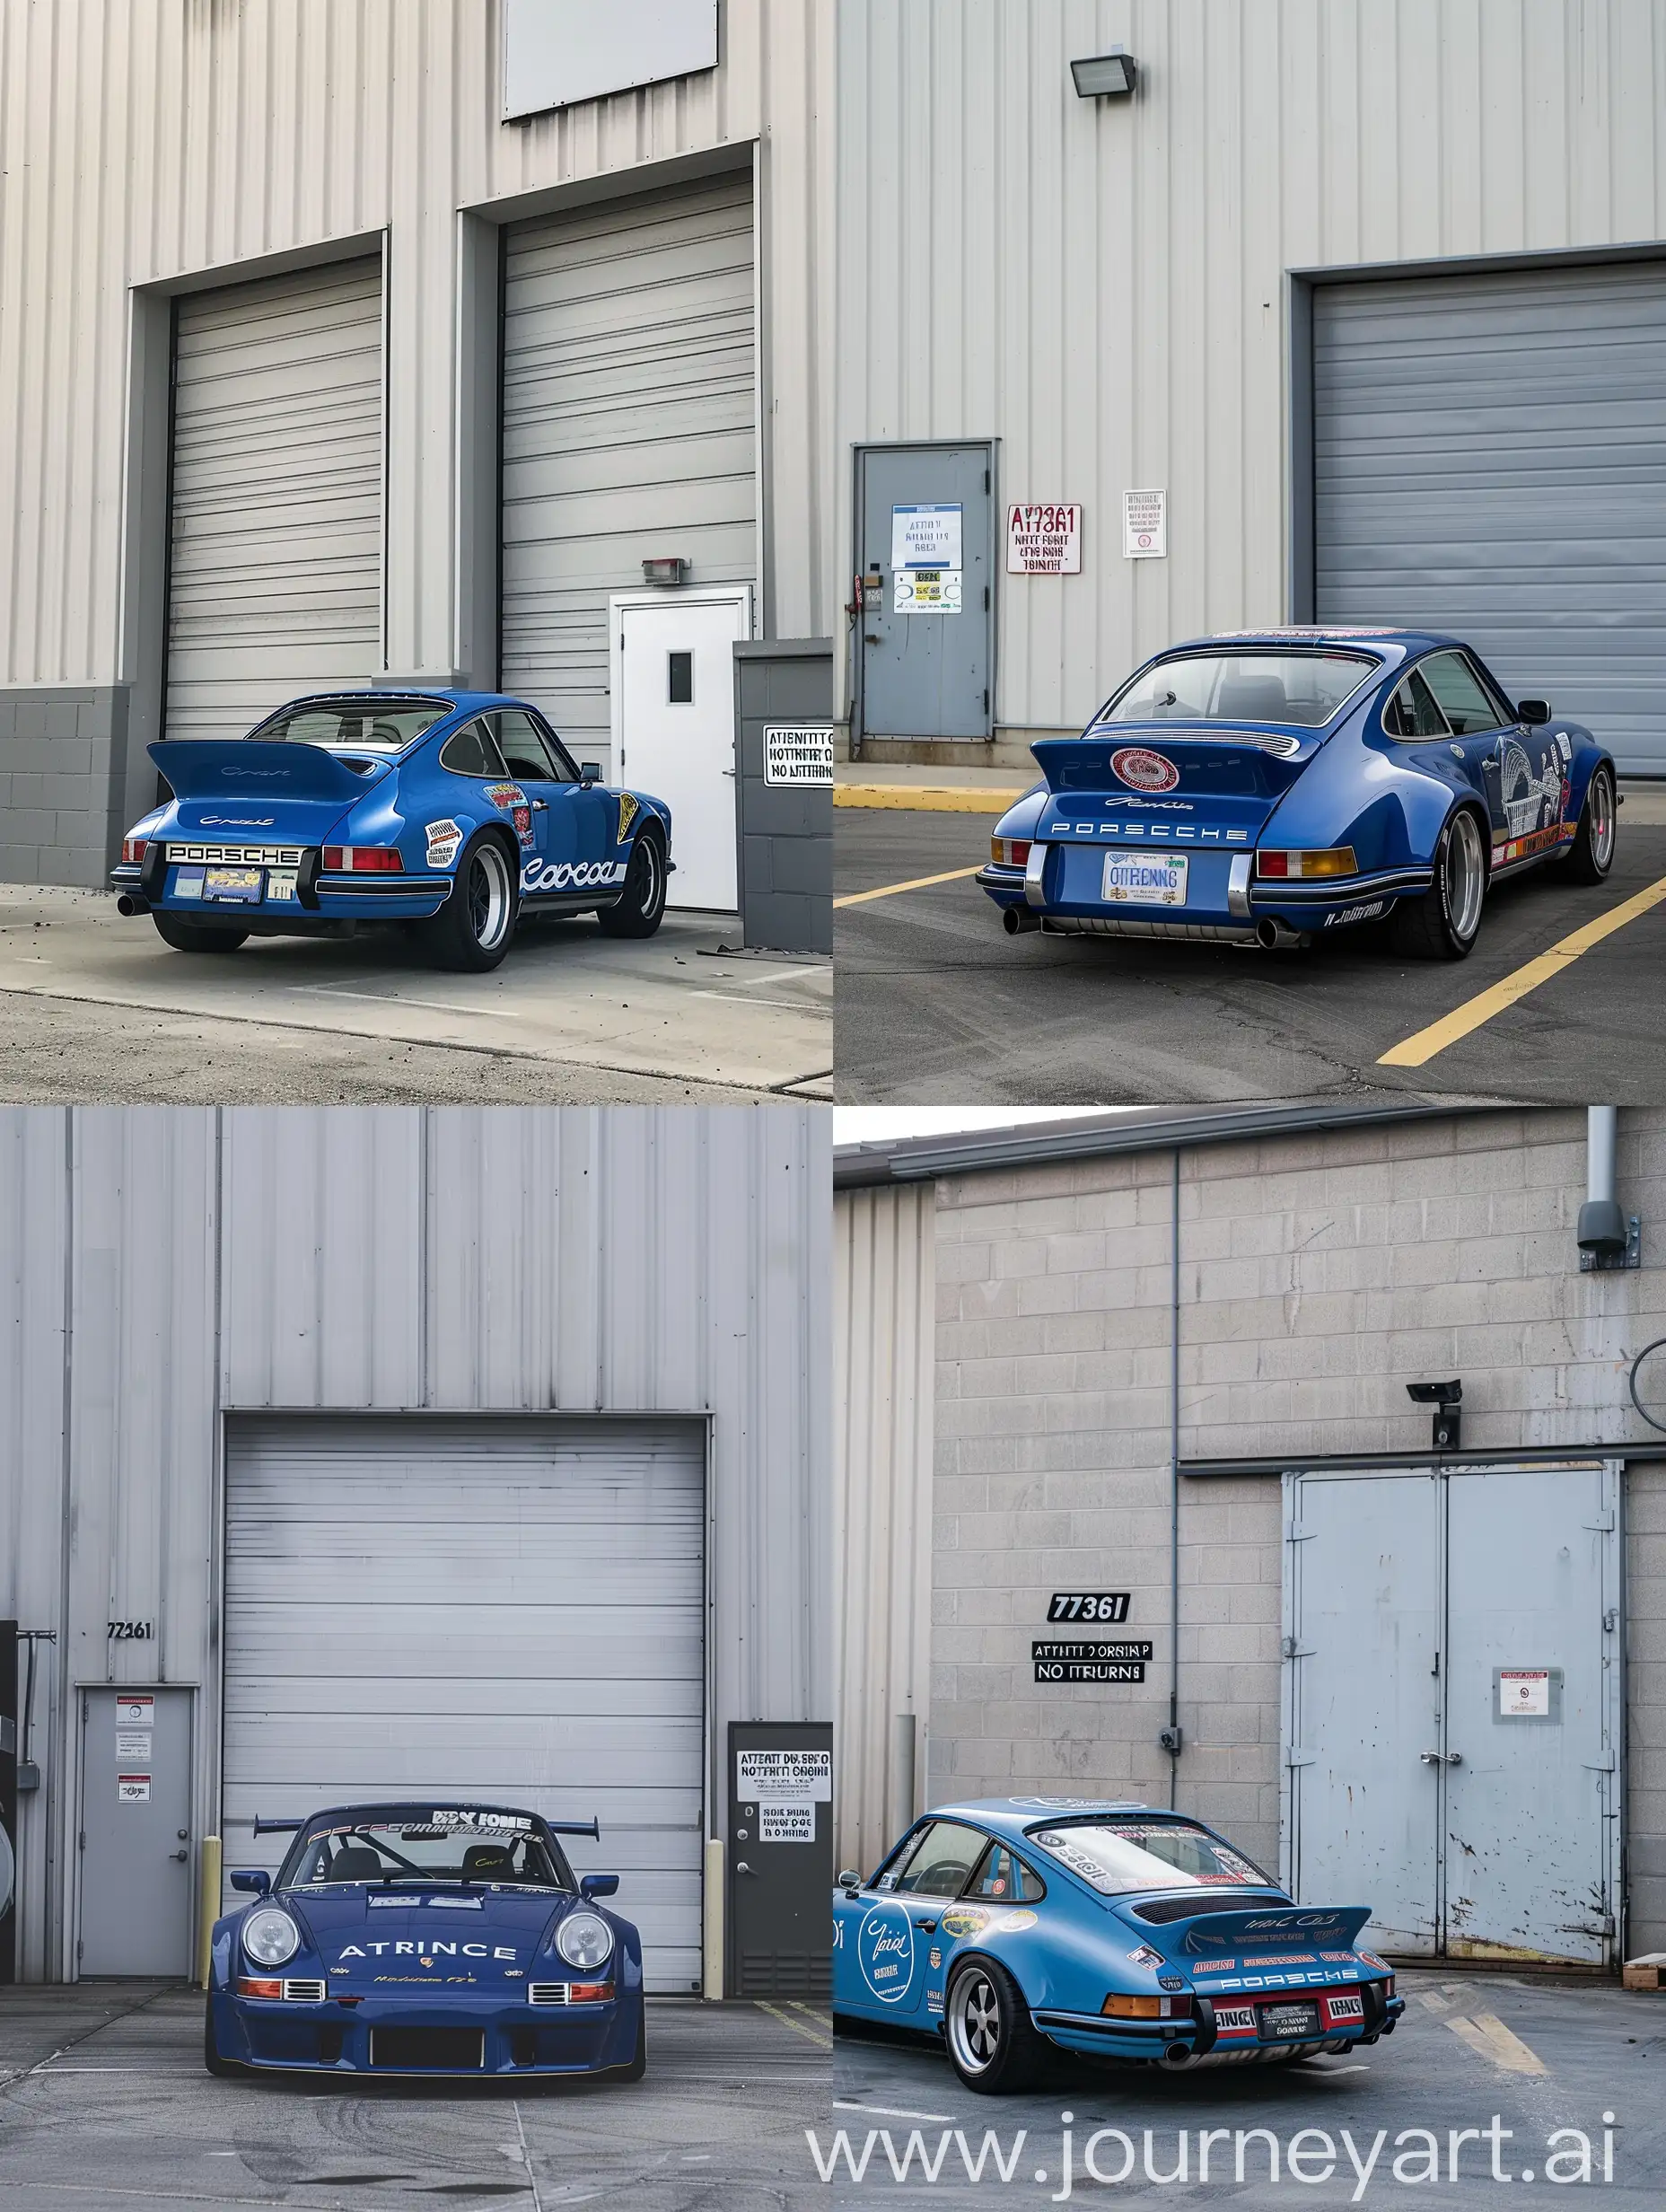 Sleek-Blue-Porsche-911-Parked-at-Industrial-Facility-with-Striking-Decals